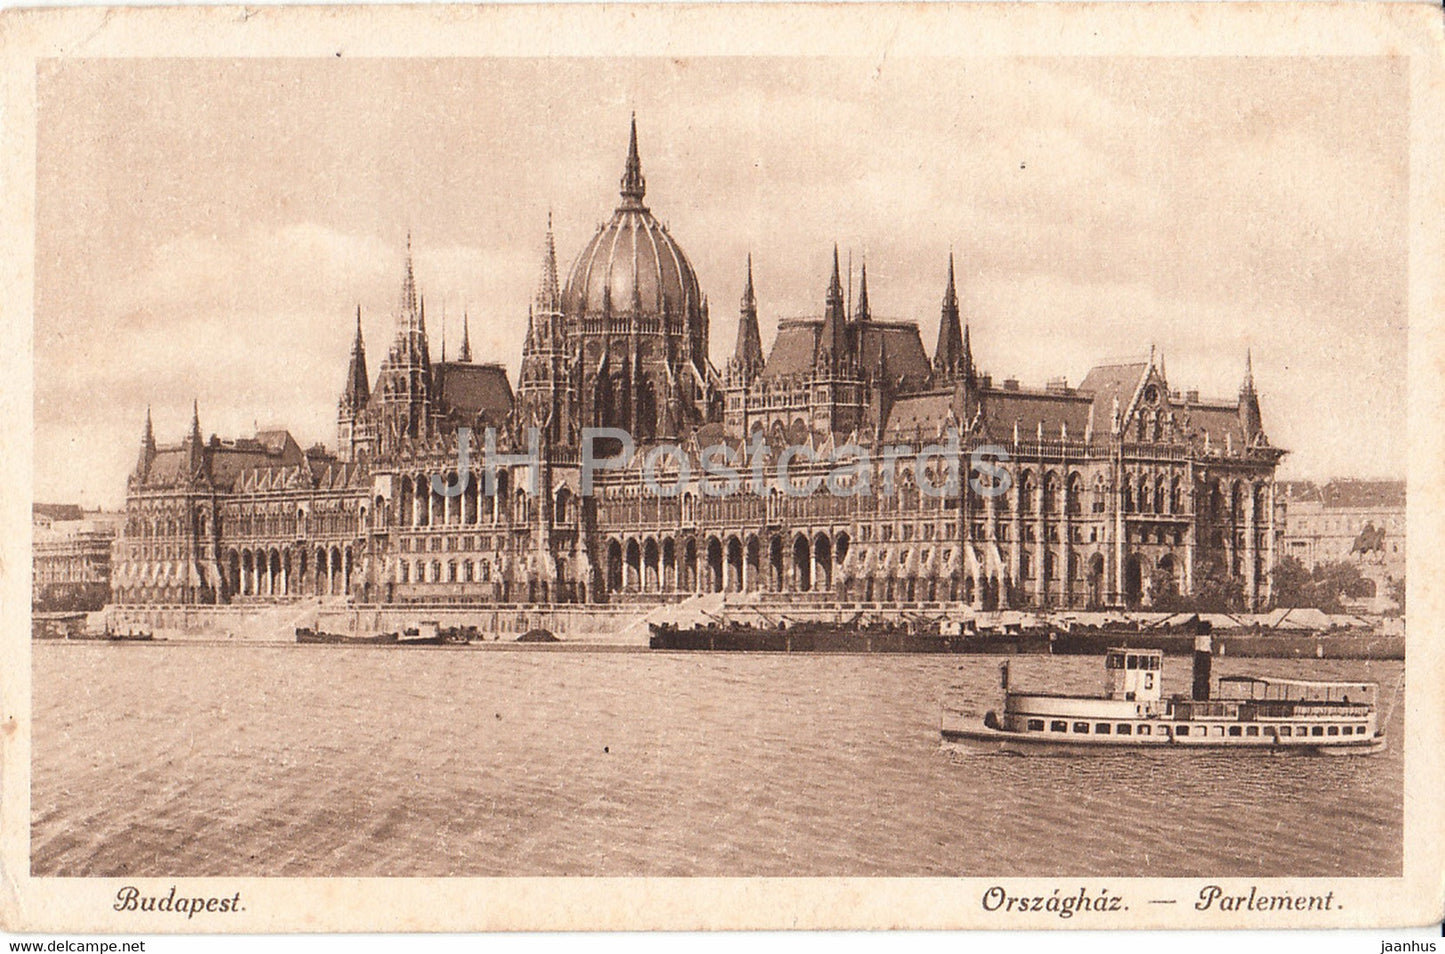 Budapest - Orszaghaz - Parlement - parliament - steamer - boat - old postcard - Hungary - unused - JH Postcards